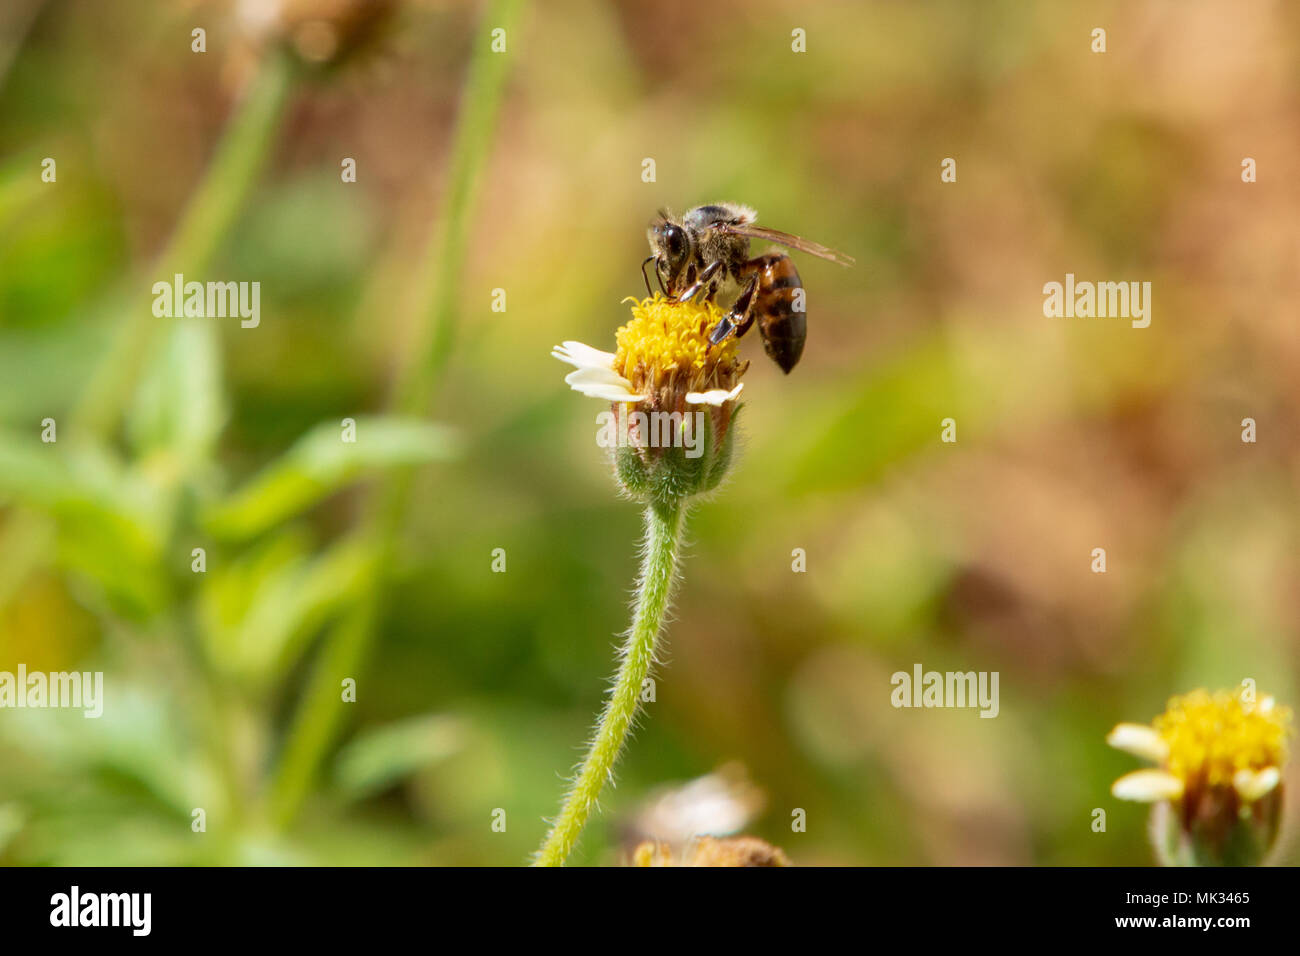 Asuncion, Paraguay. 6th May, 2018. A honey bee (Apis mellifera) feeds the nectar of tridax daisy or coatbuttons (Tridax procumbens) blooming flowers during partly sunny afternoon with temperature high around 30°C in Asuncion, Paraguay. Tridax daisy is native to the tropical Americas and can be found in fields in areas with tropical or semi-tropical climate. Credit: Andre M. Chang/ARDUOPRESS/Alamy Live News Stock Photo